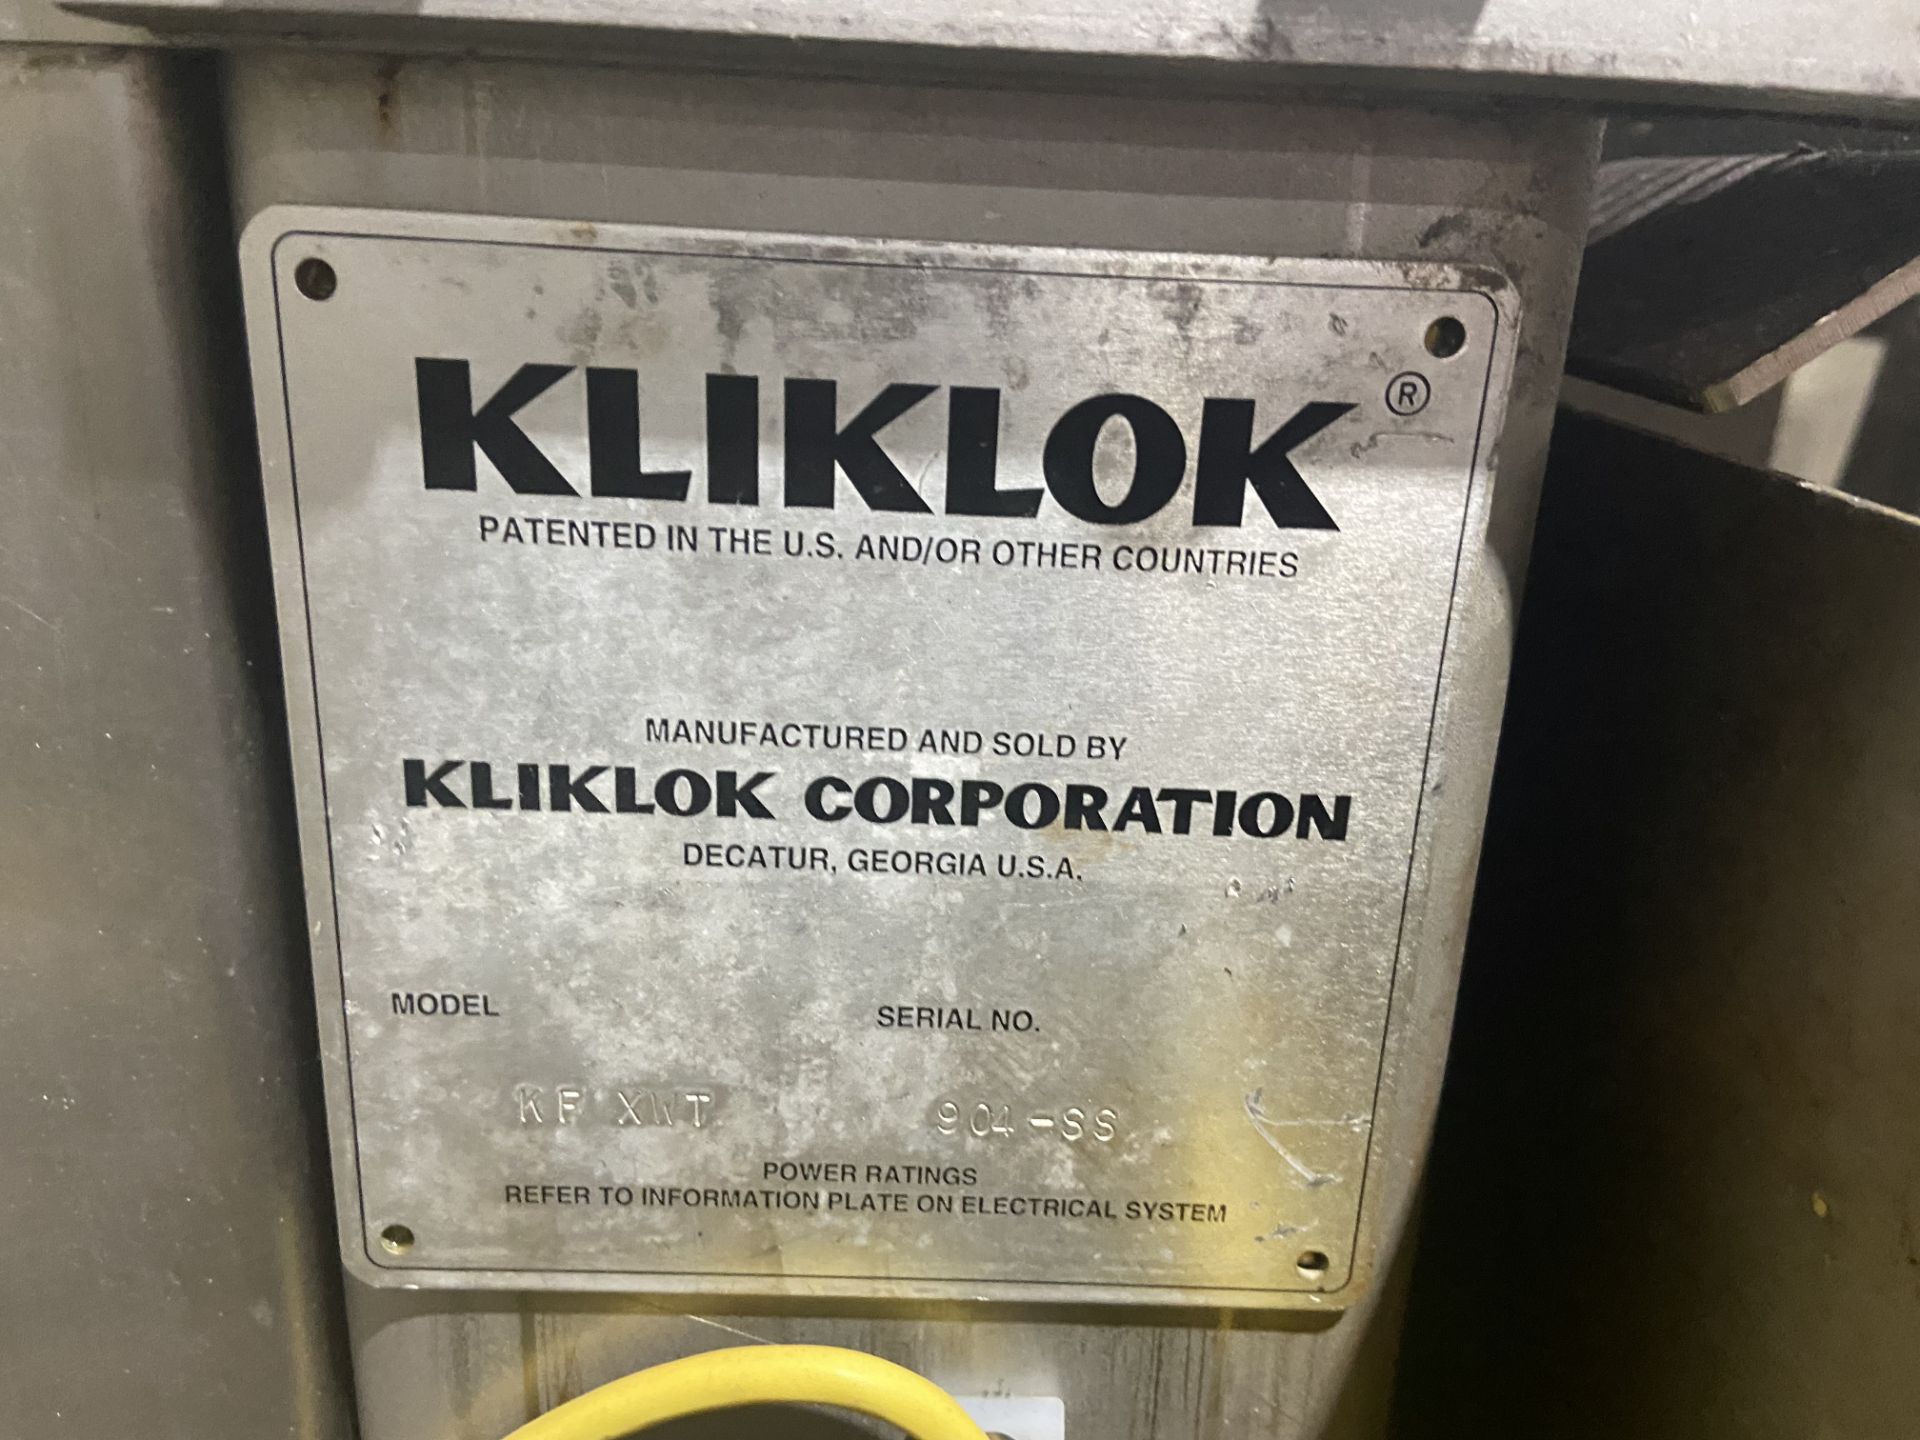 Kliklock Corp. Tray Former, M/N KF XWT, S/N 904-SS, Mounted on S/S Frame (LOCATED IN FT. ATKINSON, - Image 7 of 8